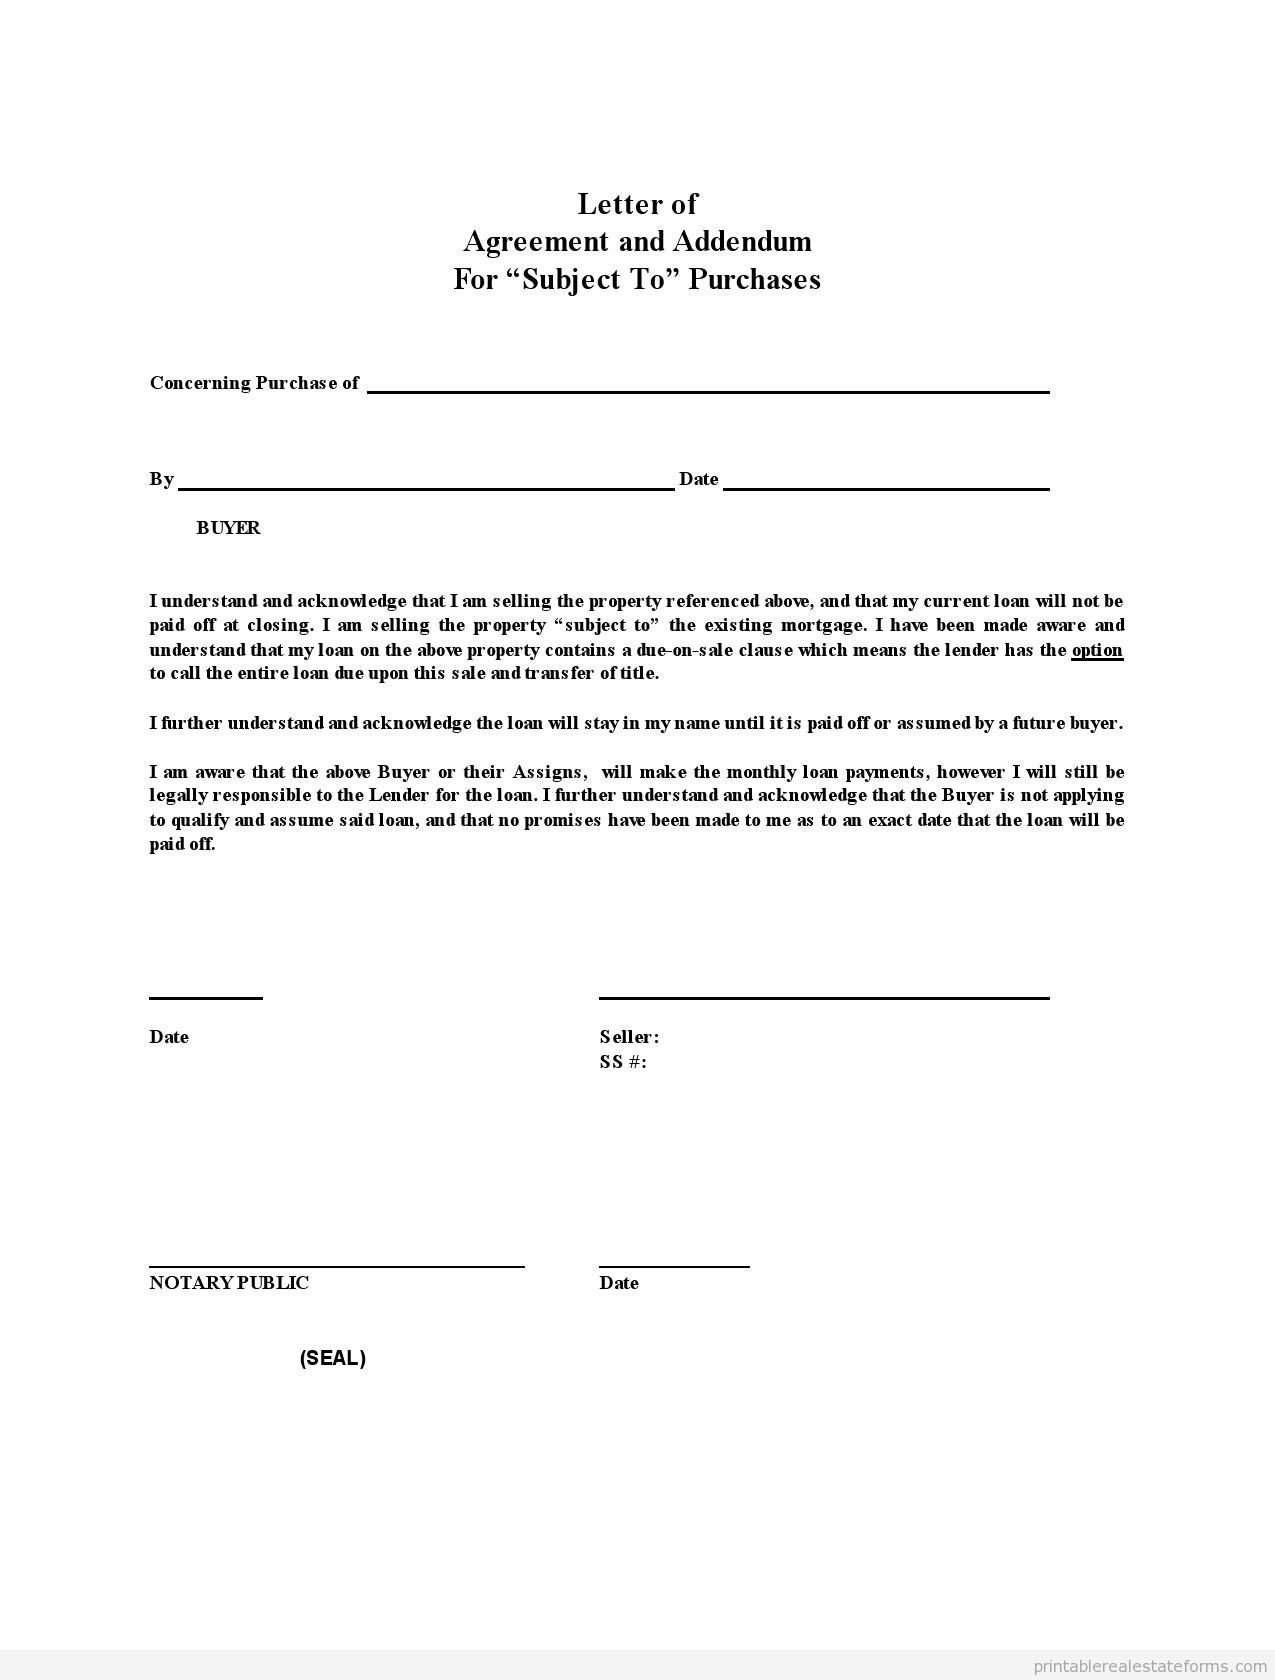 Loan Repayment Letter Template - Contract Agreement Letter Awesome Short Loan Agreement Letter Sample